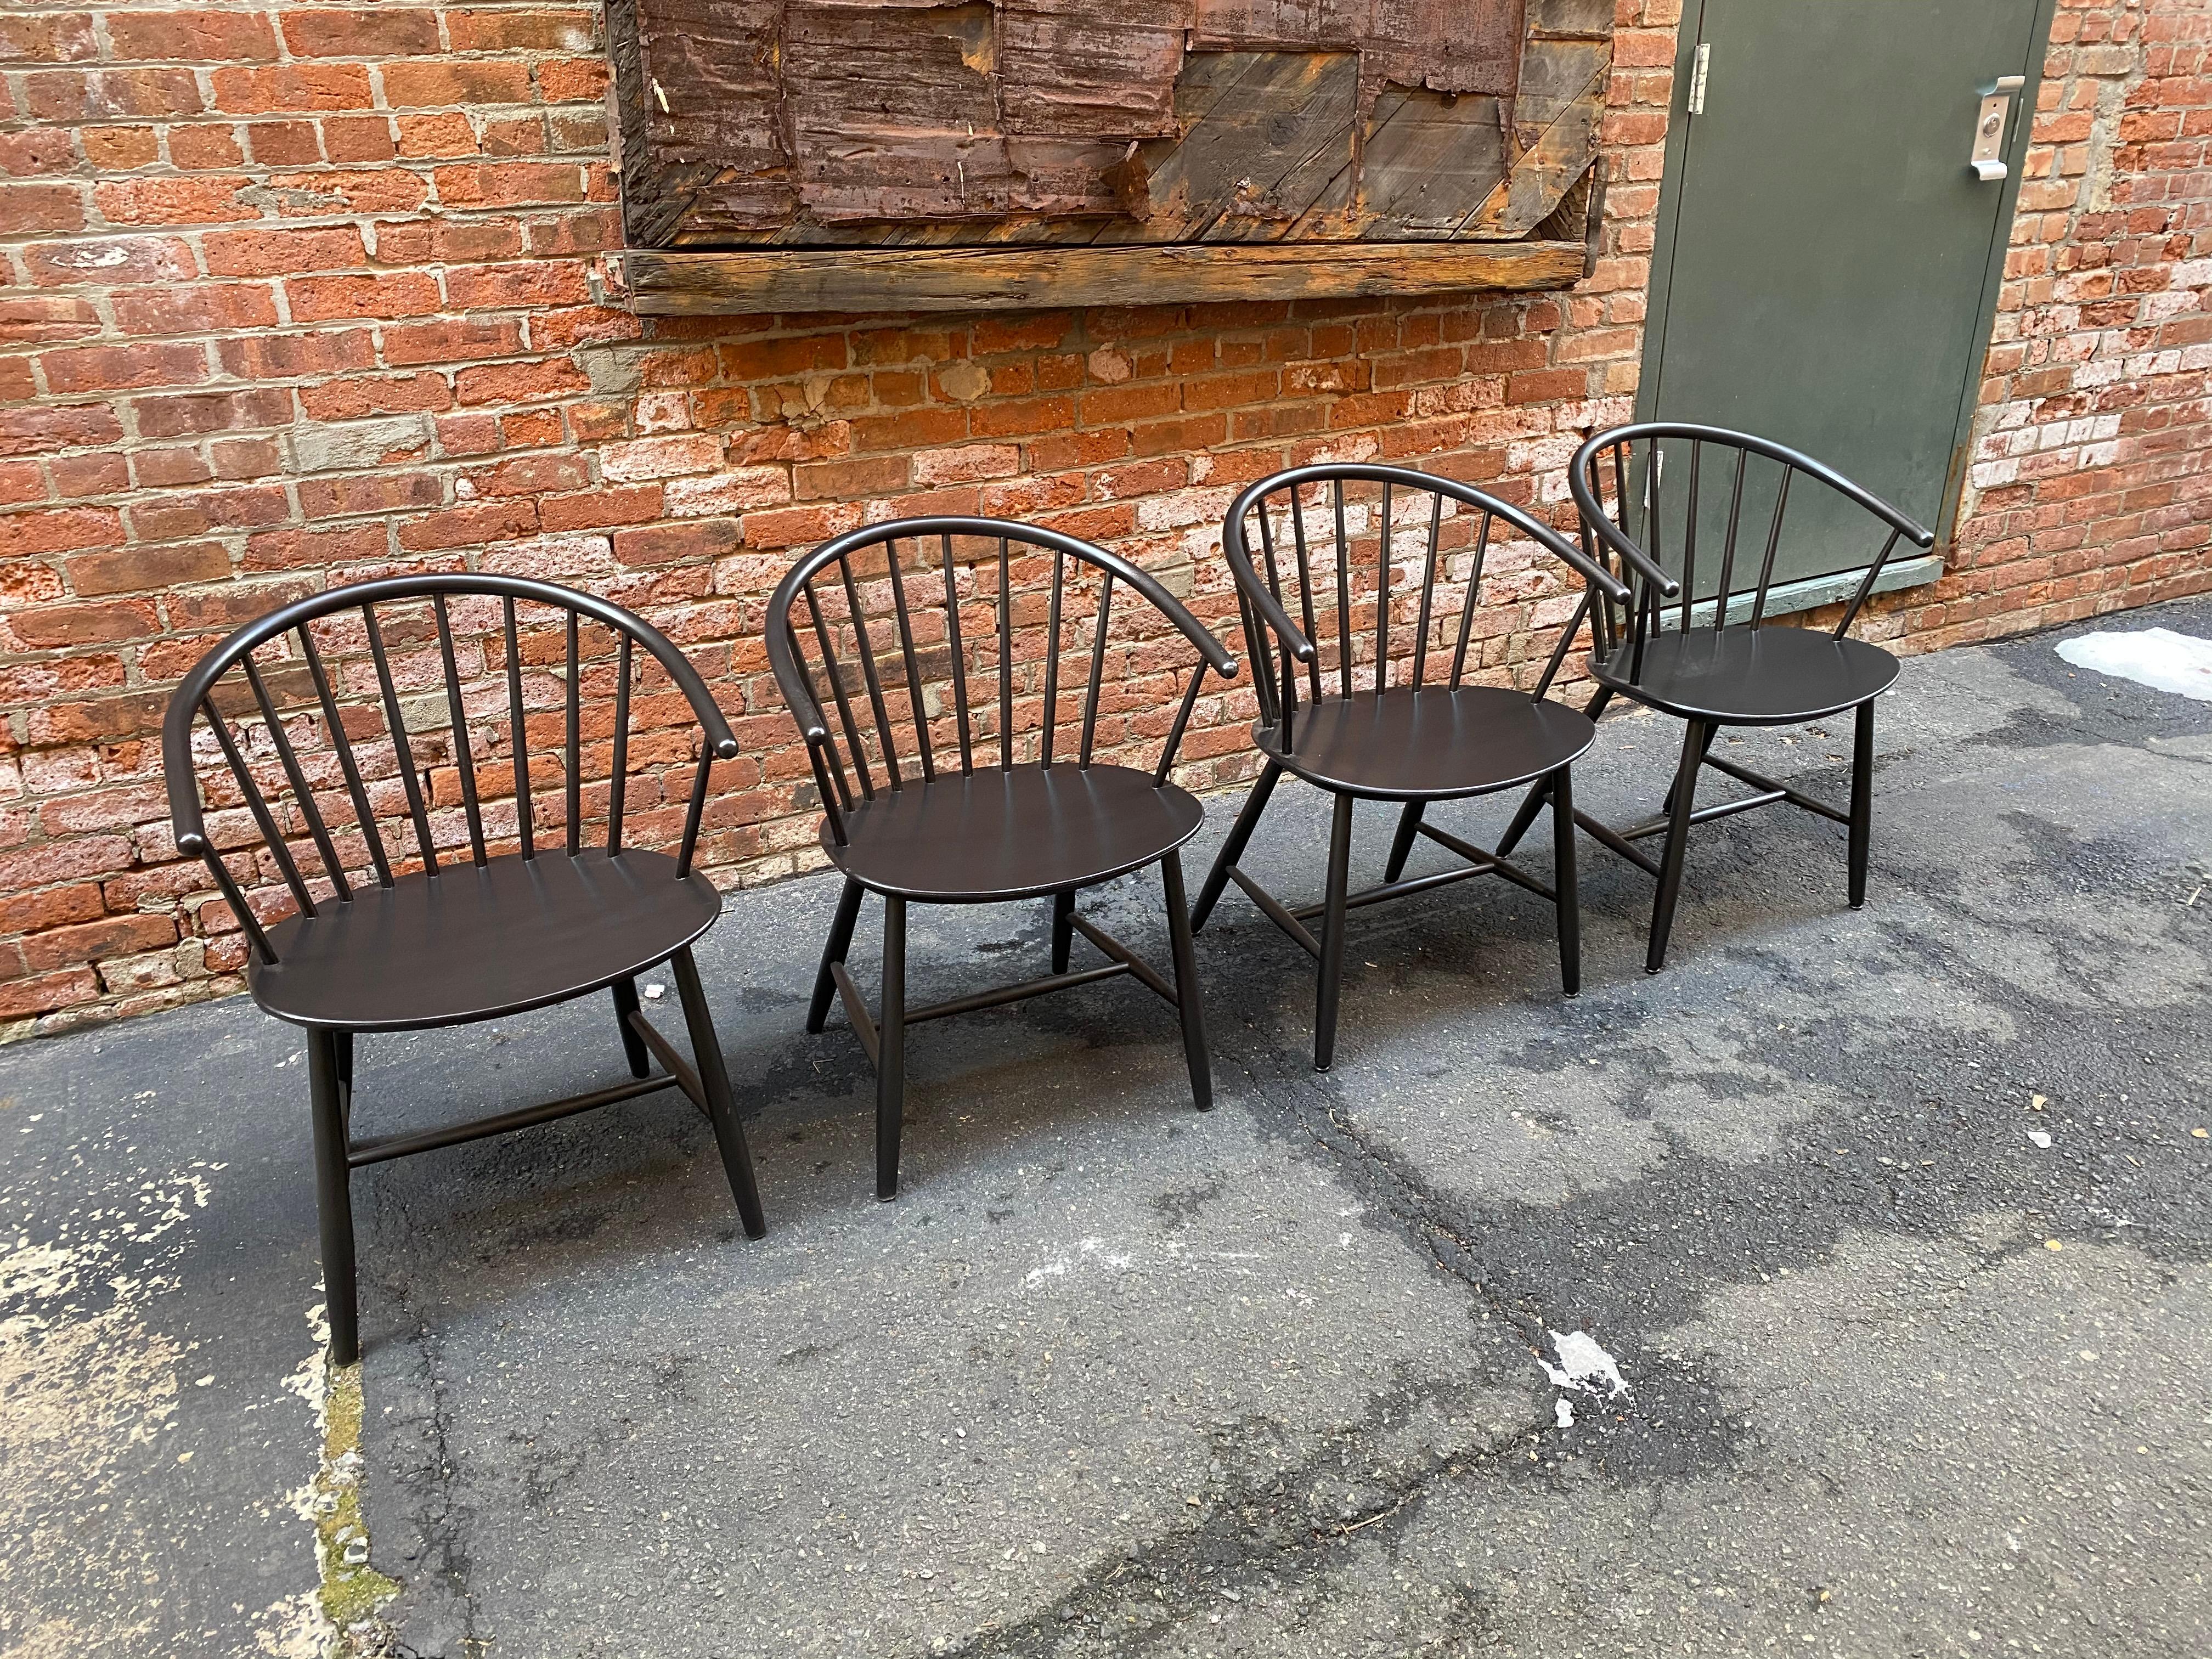 Set of four Ejvind A. Johansson designed spindle back chairs. Two are signed with the silver foil FDB Mobler, Danish control label. Good older restored black lacquer with some scratches and losses due to age and use. These elegant chairs feature a